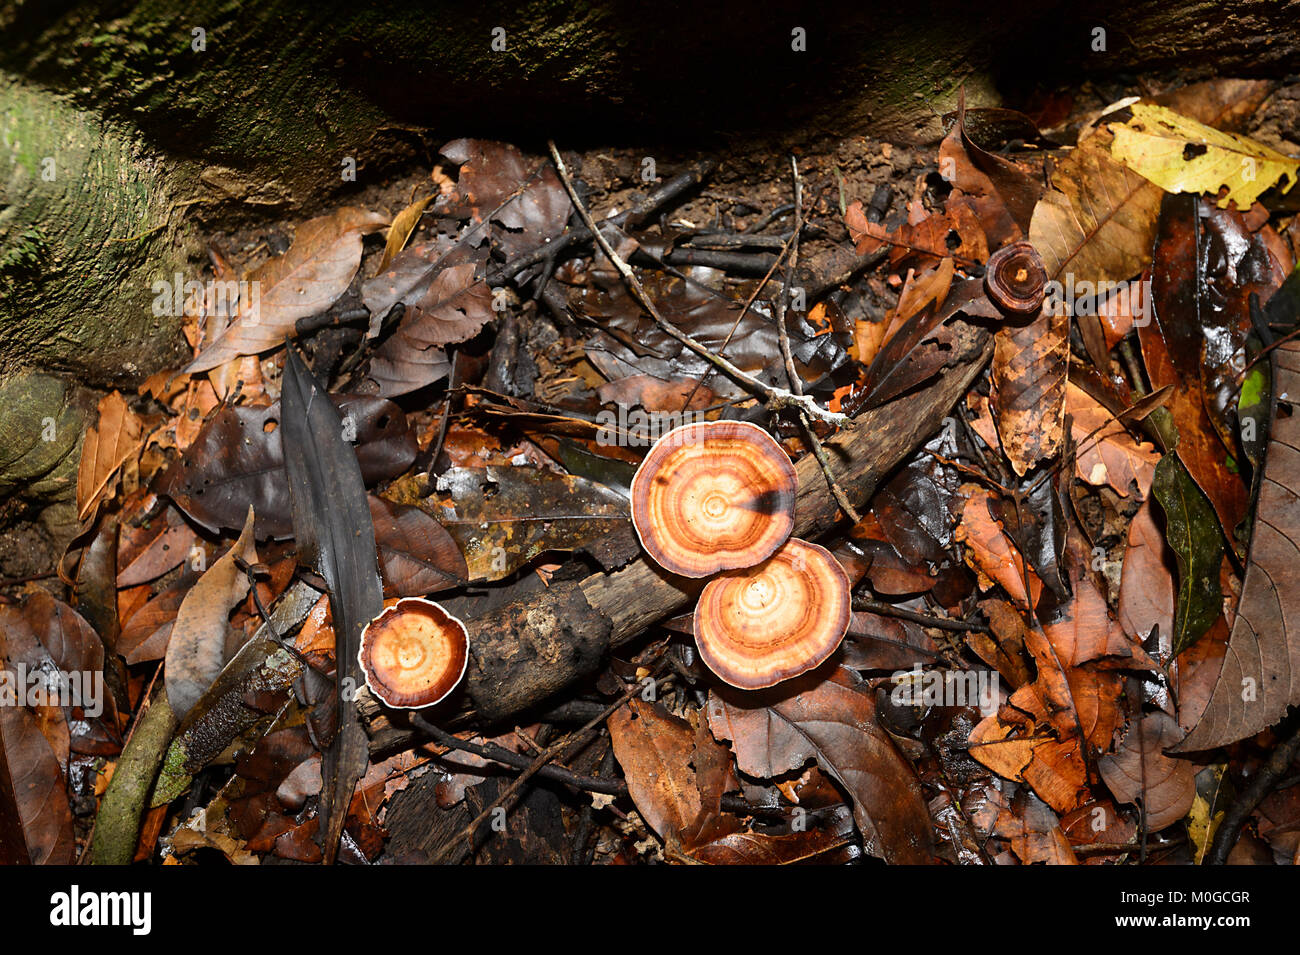 Bracket Fungi growing on the forest floor, Danum Valley Conservation Area, Borneo, Sabah, Malaysia Stock Photo